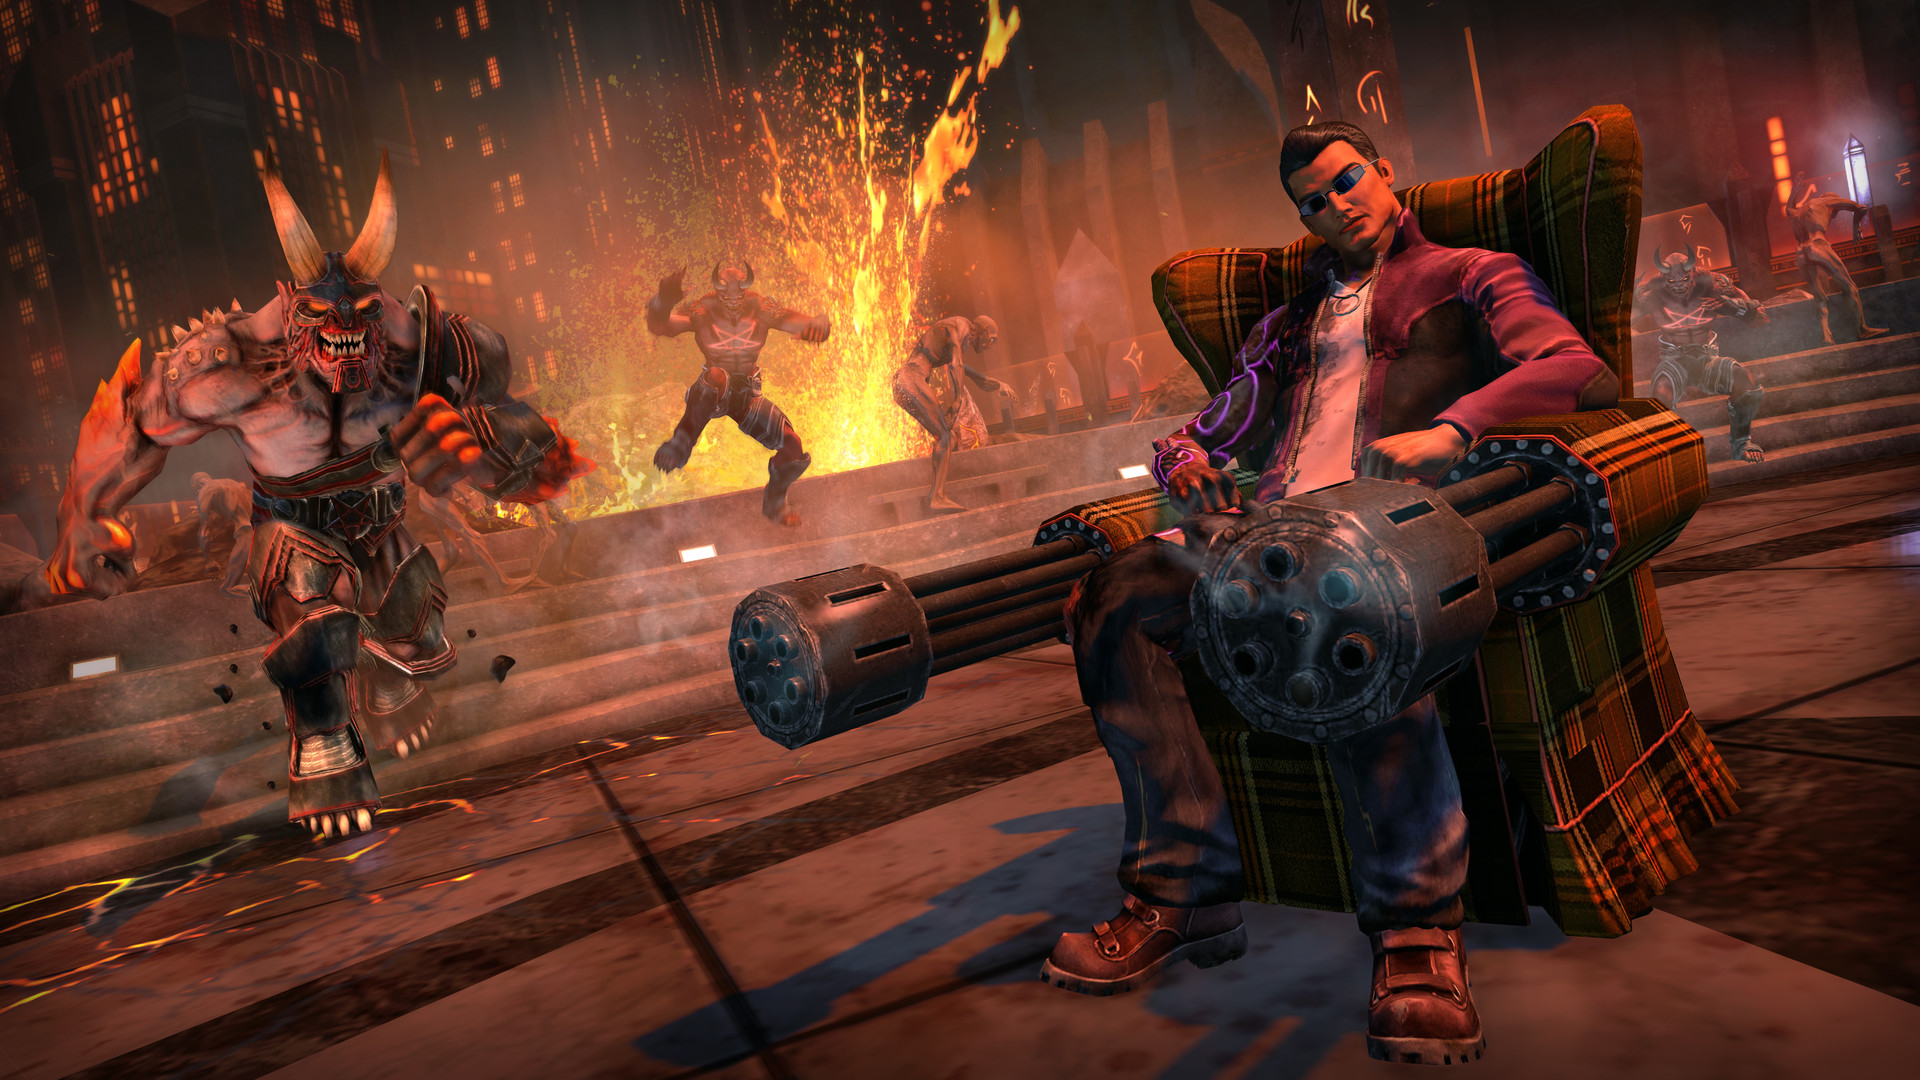 Buy Saints Row Ultimate Franchise Pack from the Humble Store